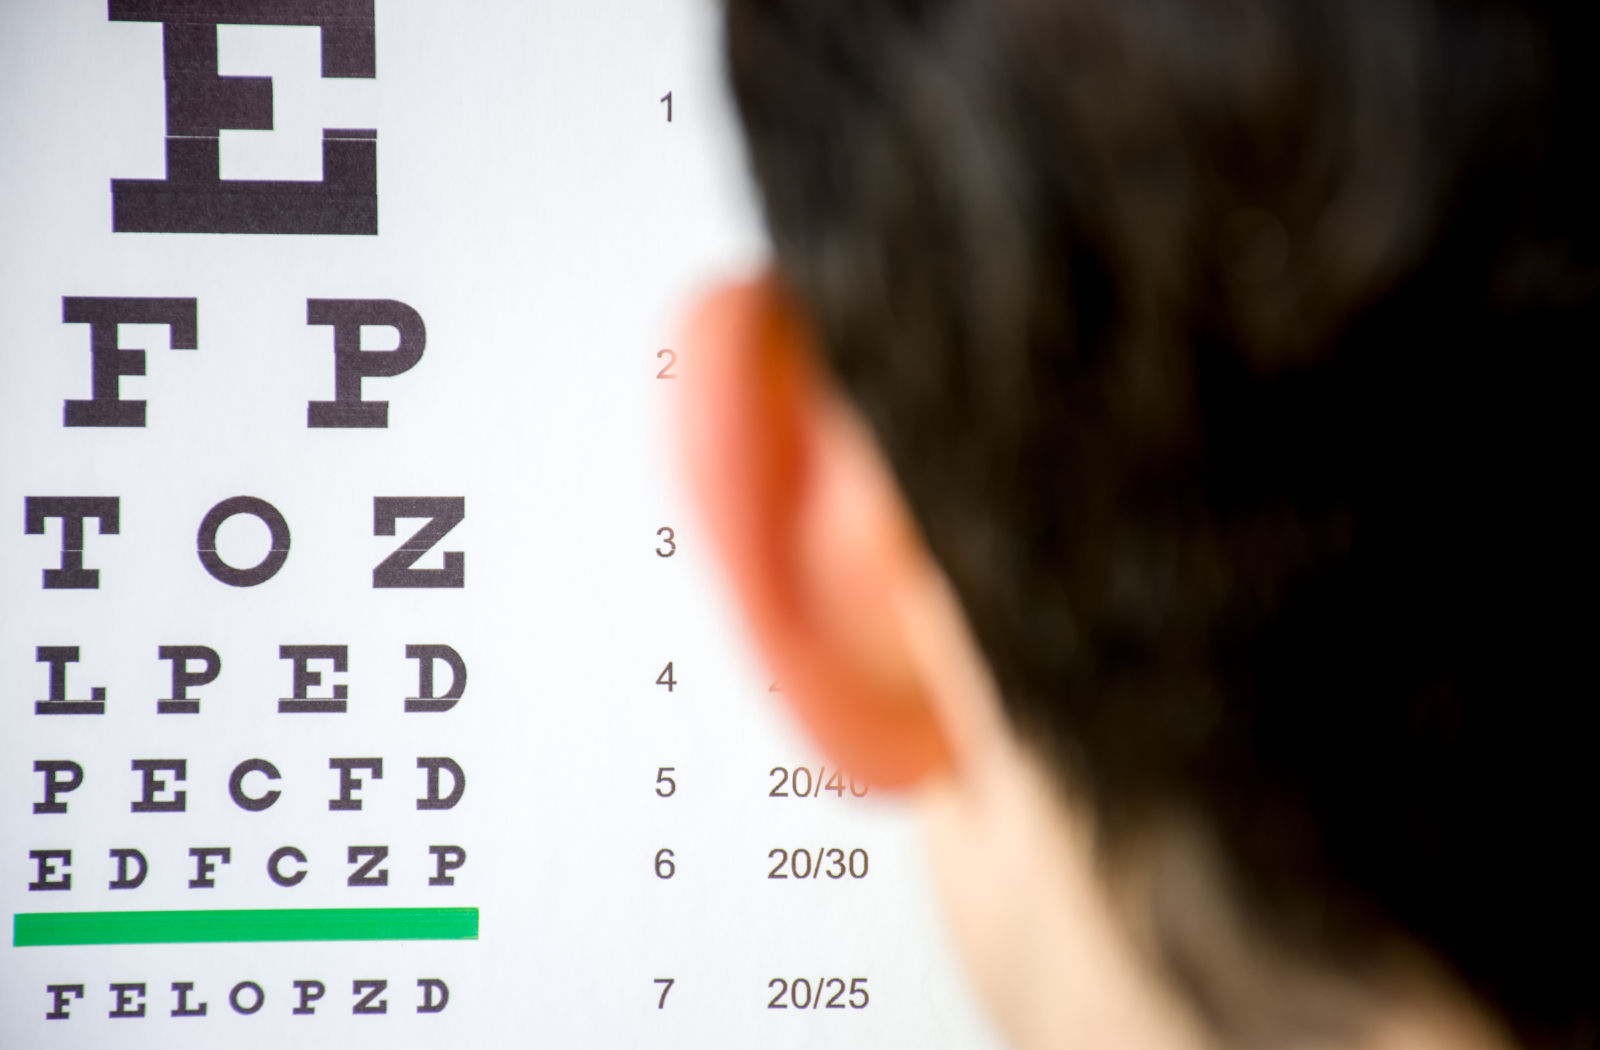 A young boy reading a Snellen eye chart to test vision